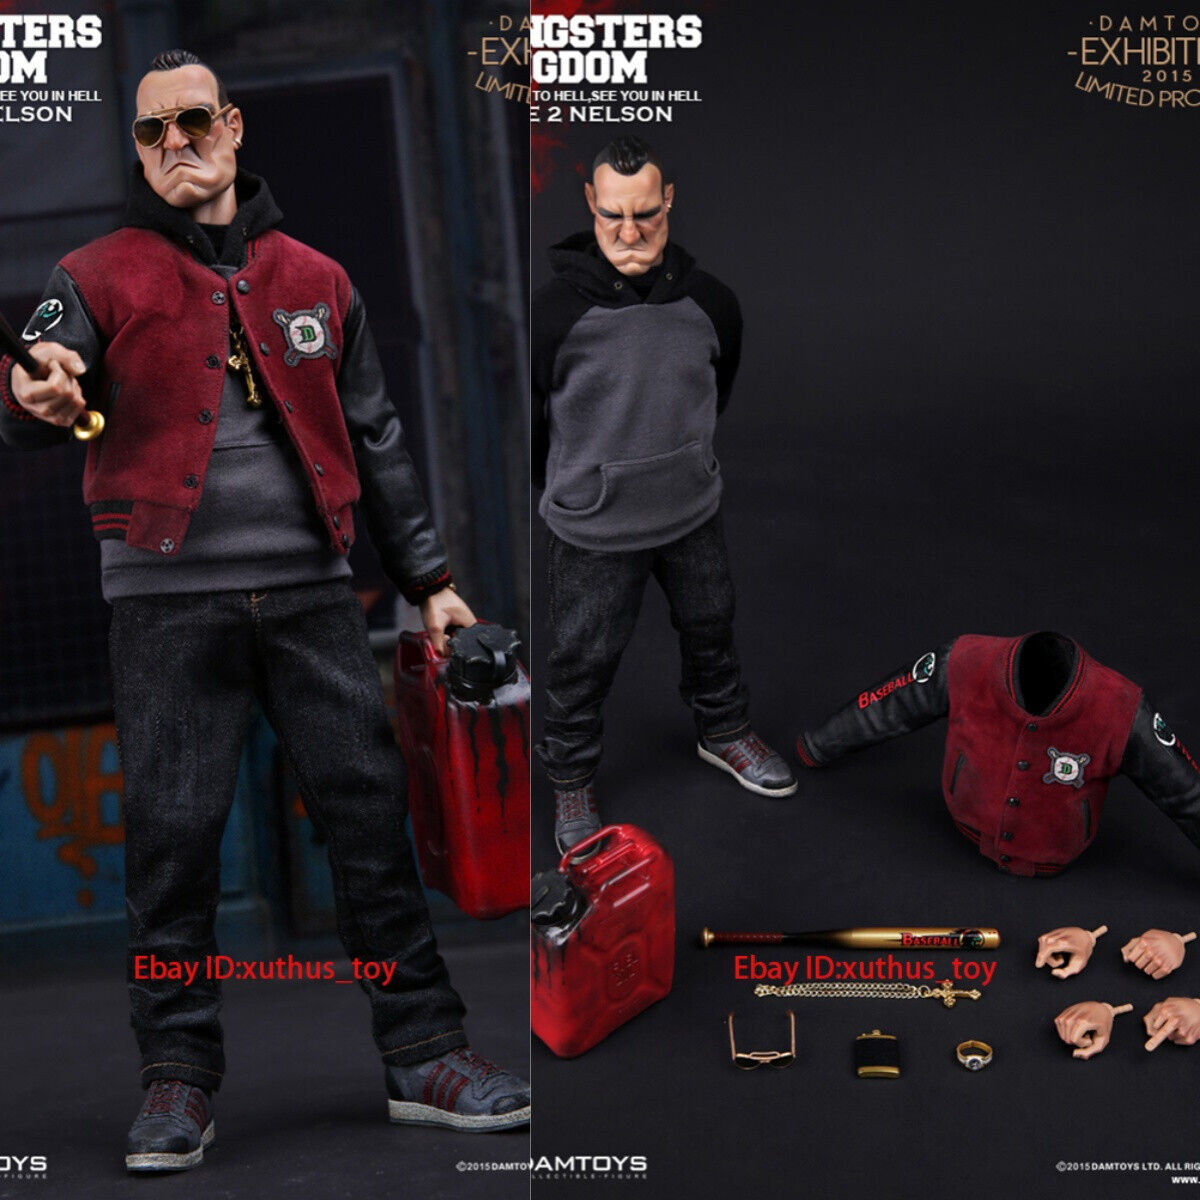 In Stock Damtoys Gk002ex 1/6 Gangsters Kingdom Spade 2 Nelson Special Project